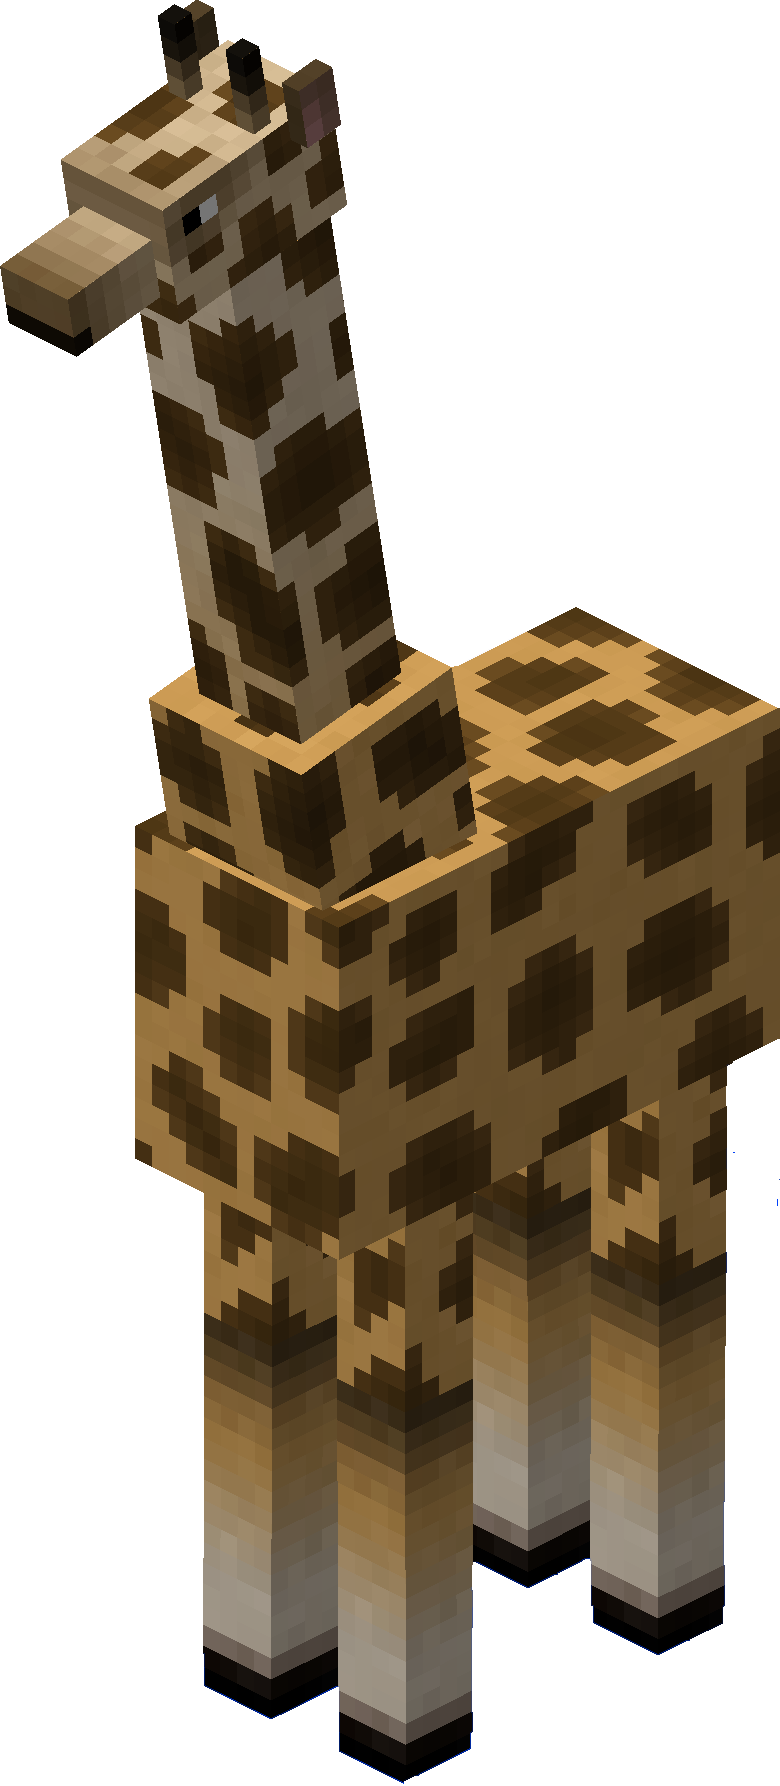 Giraffe  The Lord of the Rings Minecraft Mod Wiki 